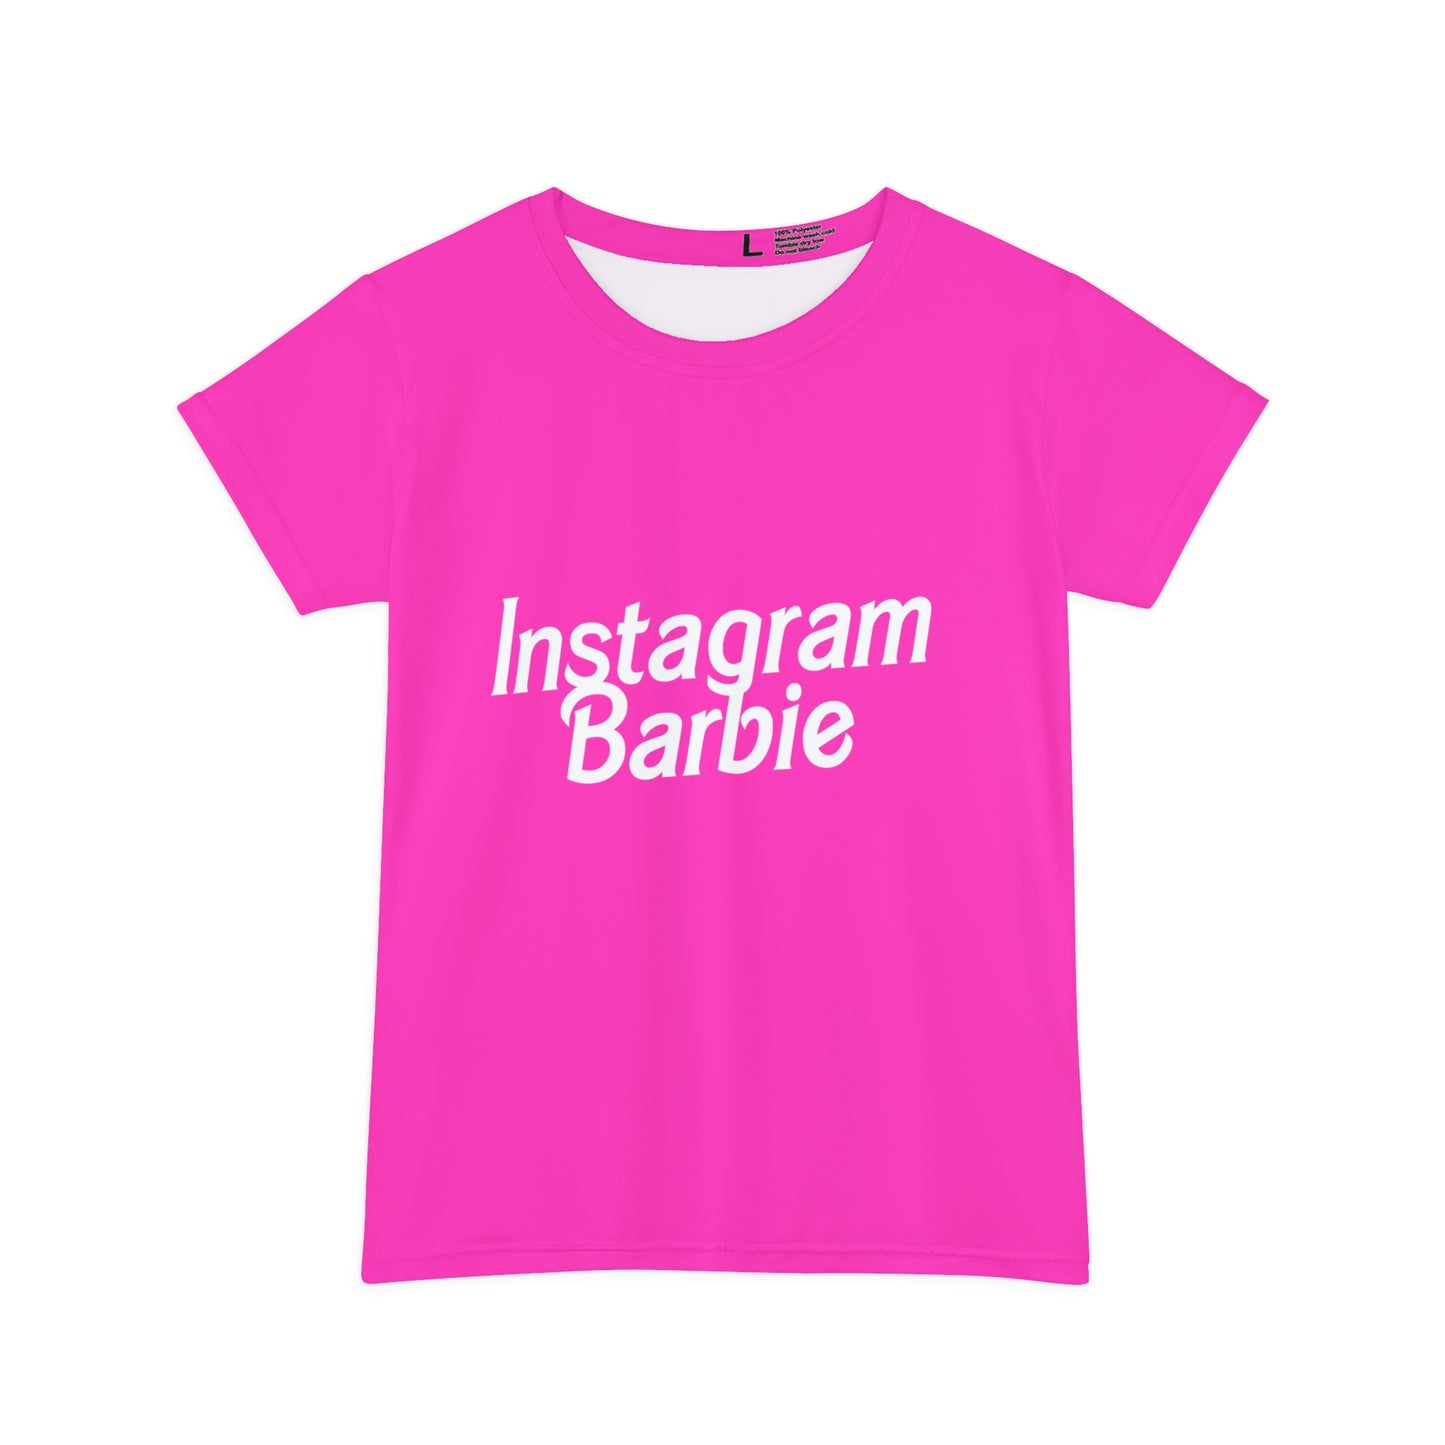 Instagram Barbie, Bachelorette Party Shirts, Bridesmaid Gifts, Here comes the Party Tees, Group Party Favor Shirts, Bridal Party Shirt for women